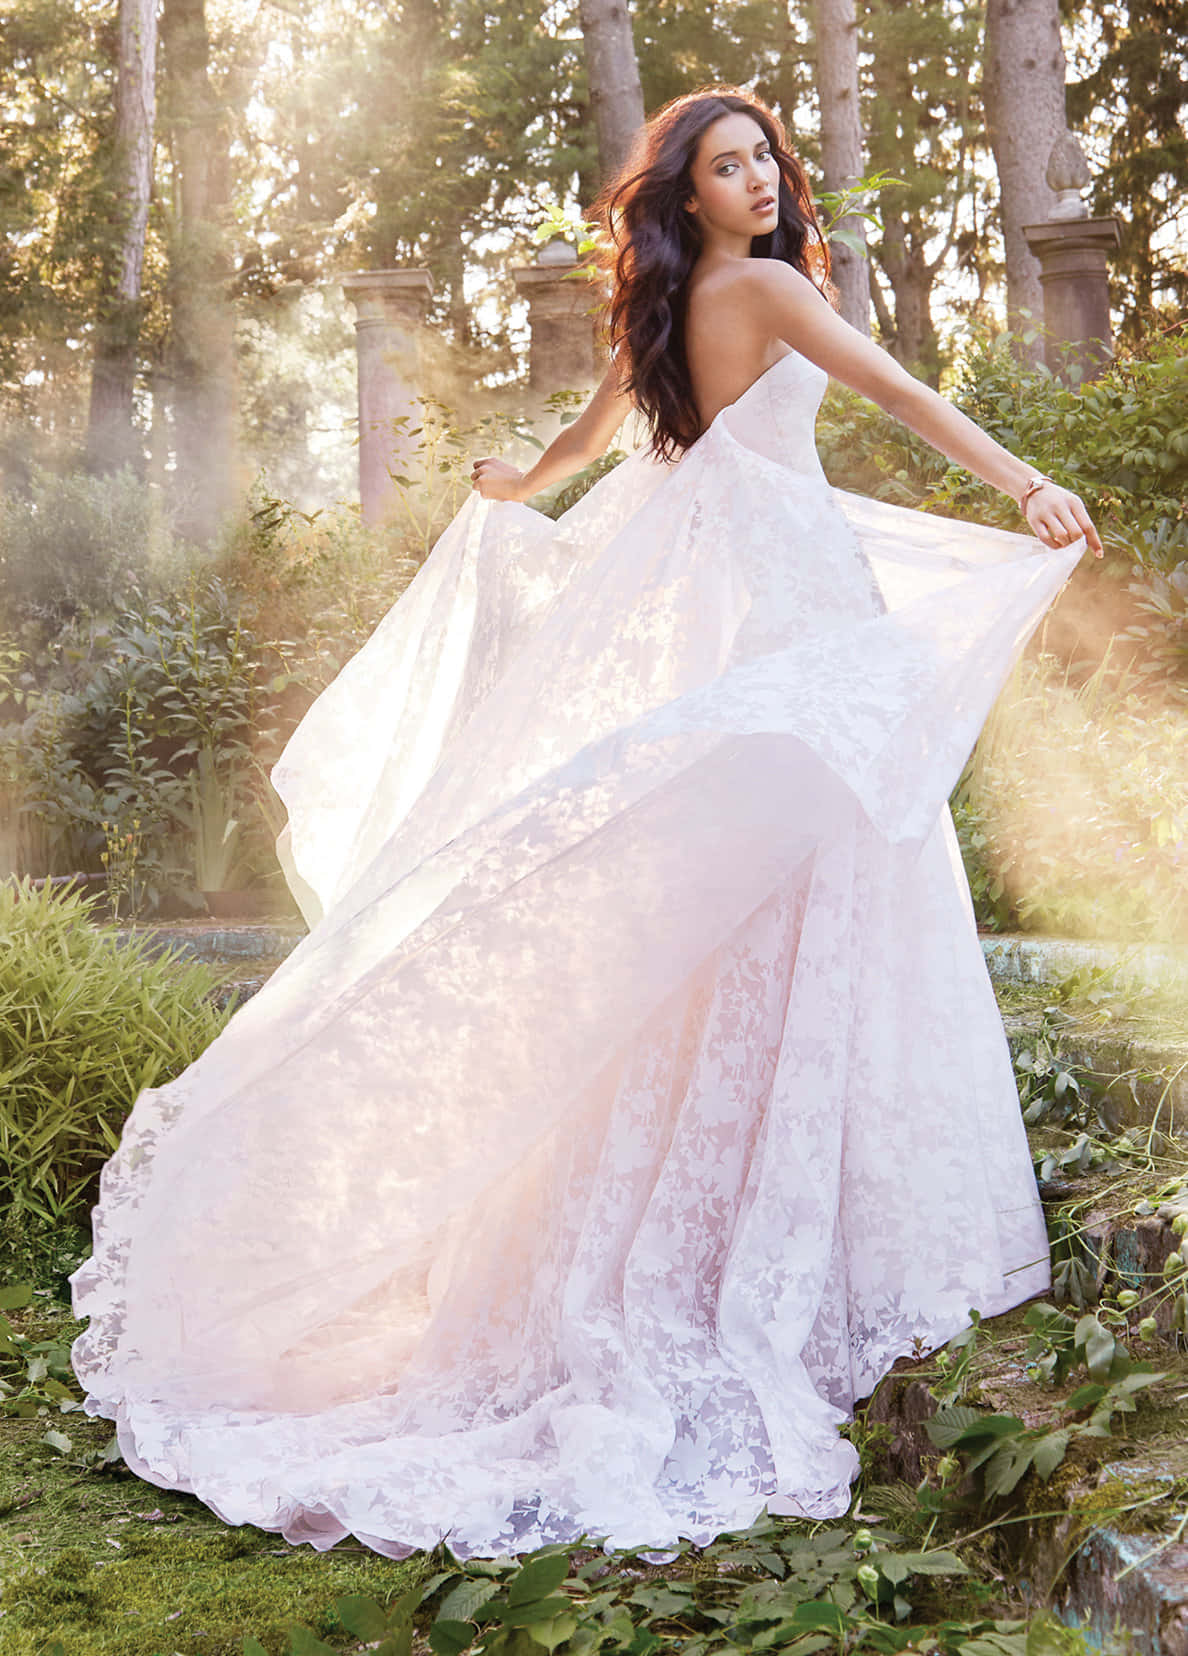 Let this exquisite wedding gown make your special day even more special.